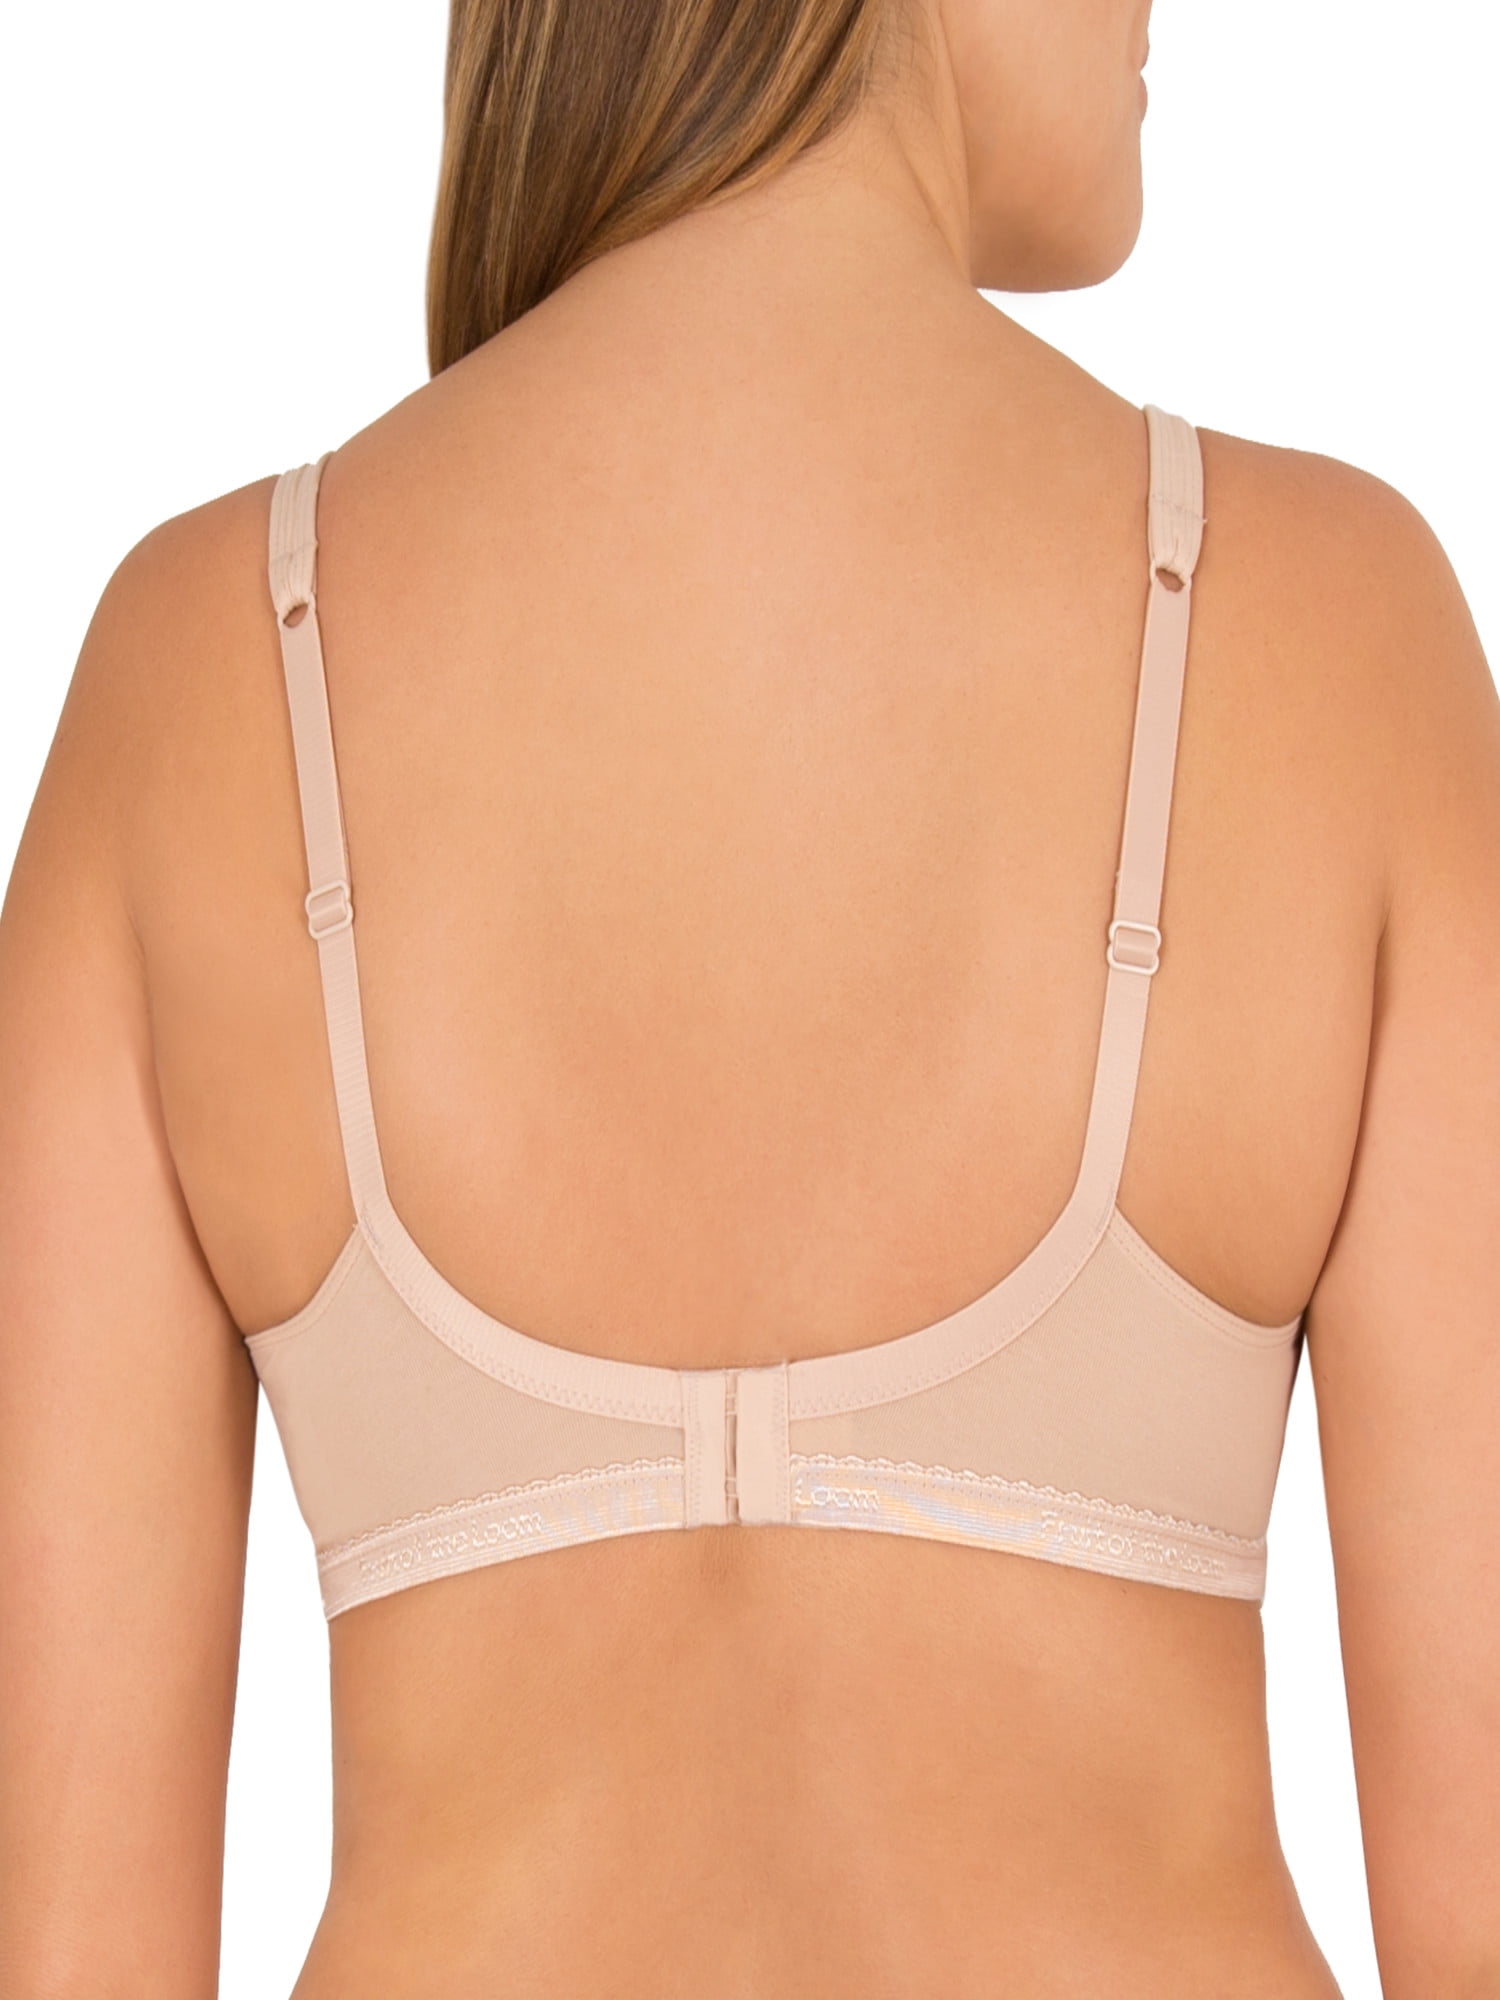 Fruit of The Loom Women's Cotton Stretch Extreme Comfort Bra, Style 9292PR,  2-Pack 